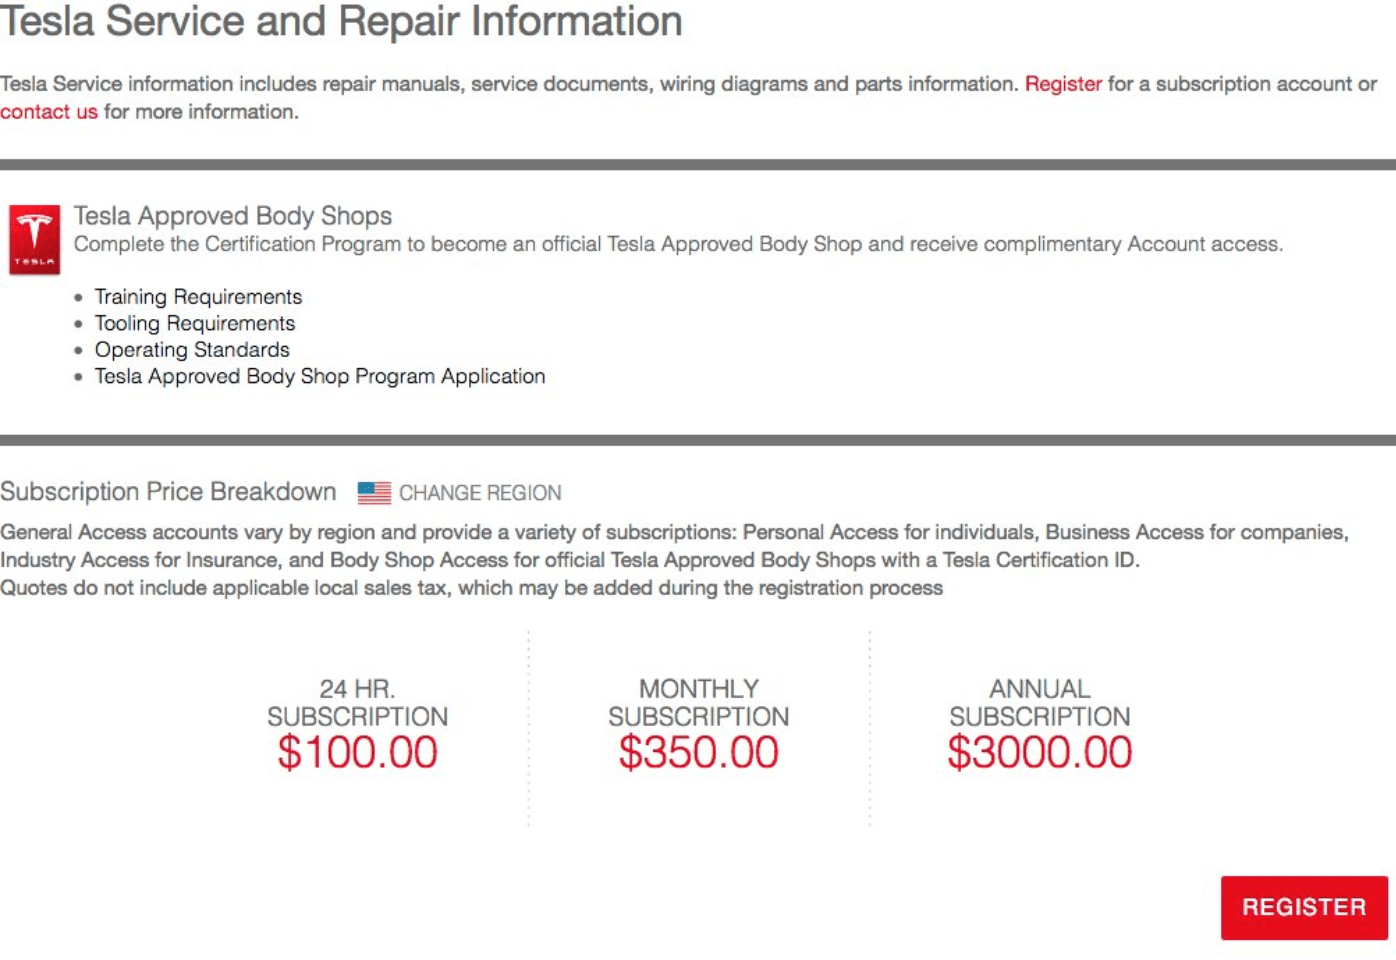 Tesla Now Gives Free Access to Repair Manuals, Service Info and More